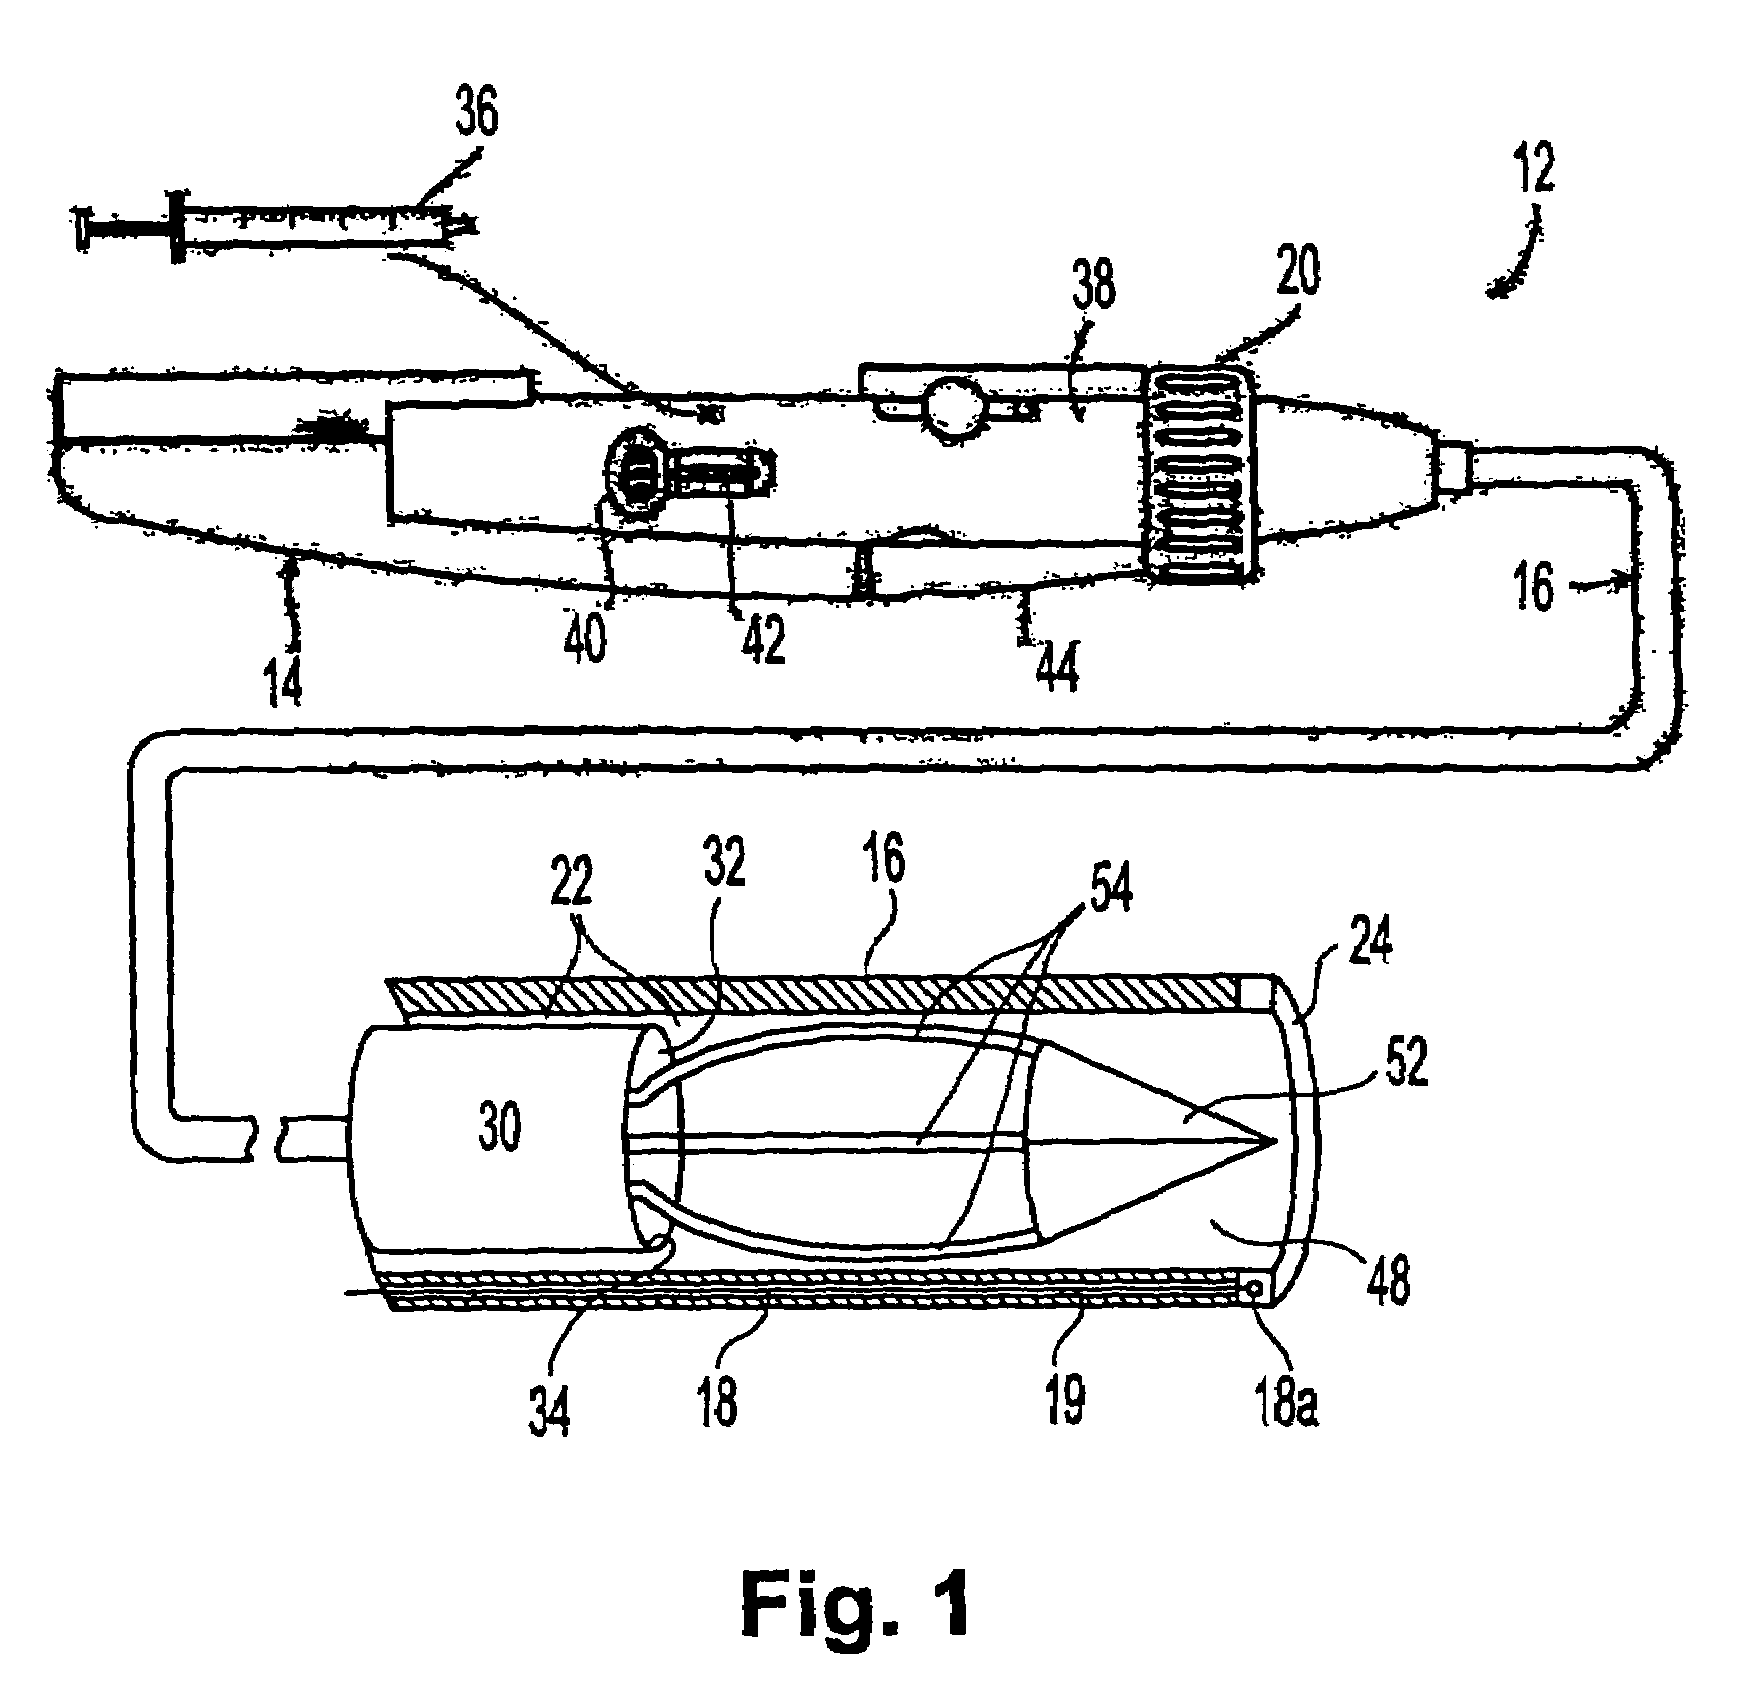 Apparatus and method for delivering therapeutic and diagnostic agents